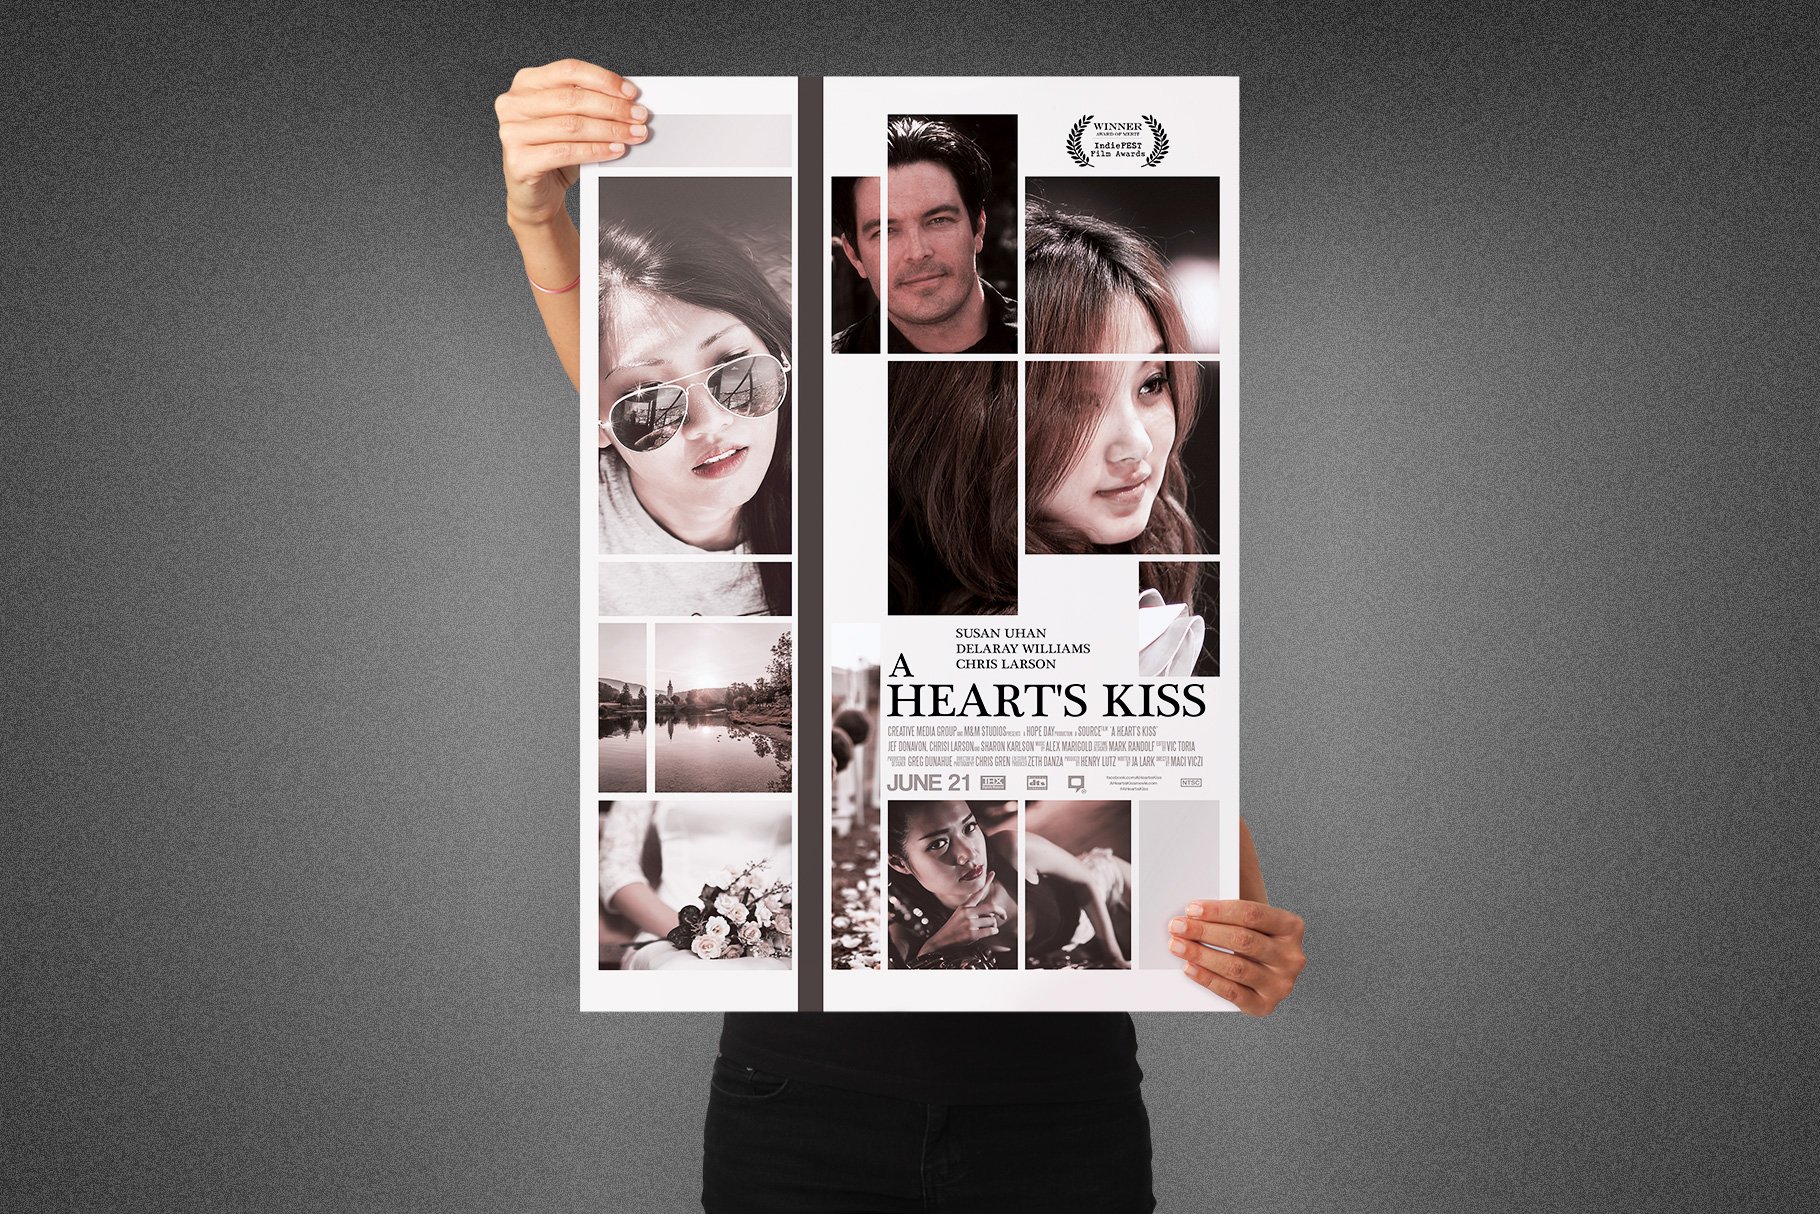 A Heart's Kiss Movie Poster Template cover image.